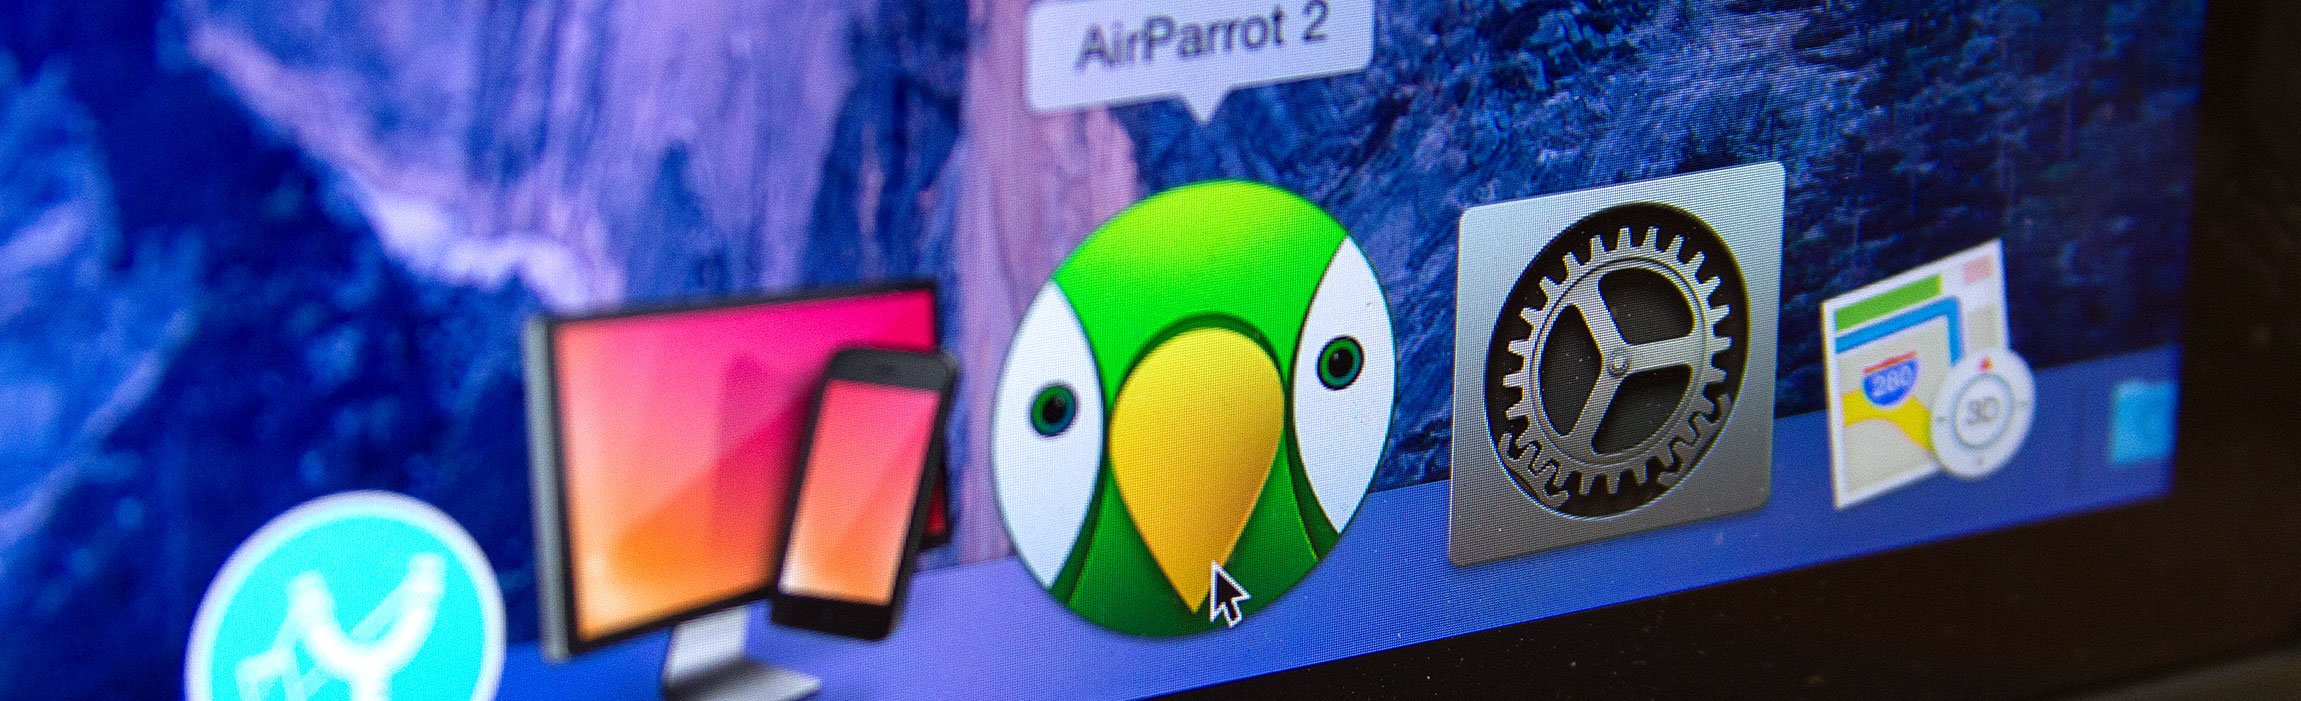 airparrot 2 free download mac